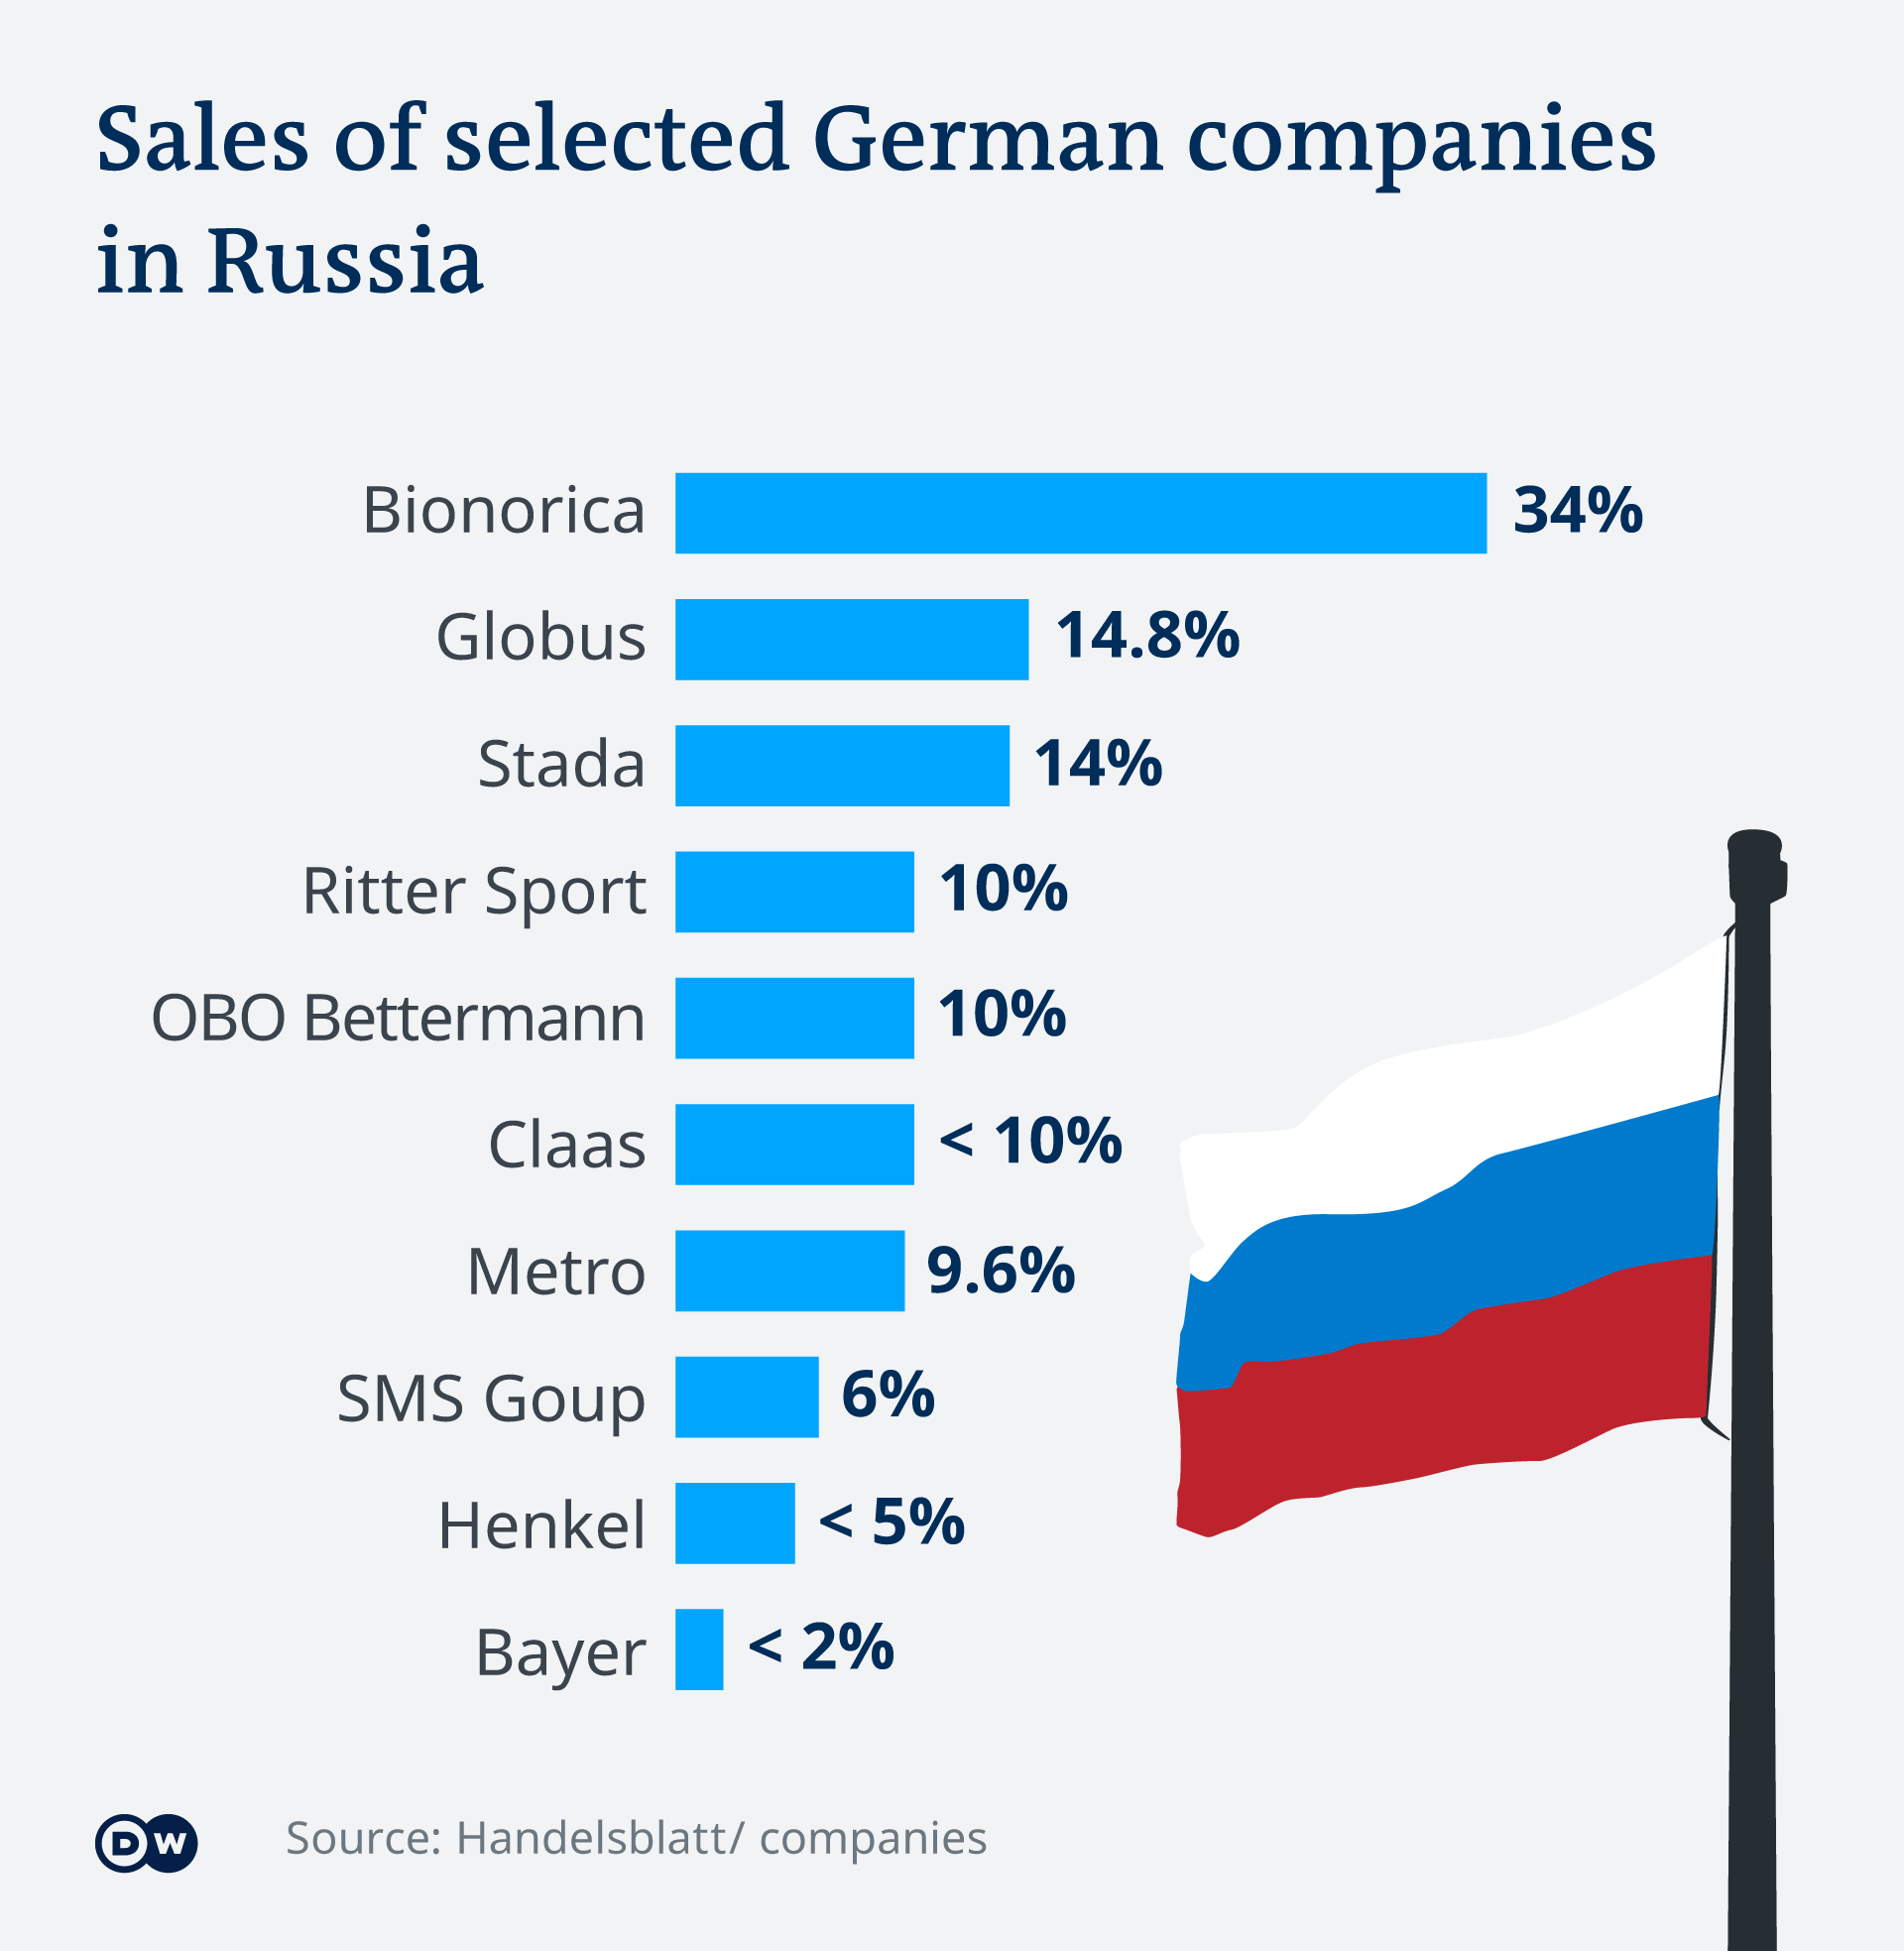 A chart showing the sales of a number of German companies in Russia